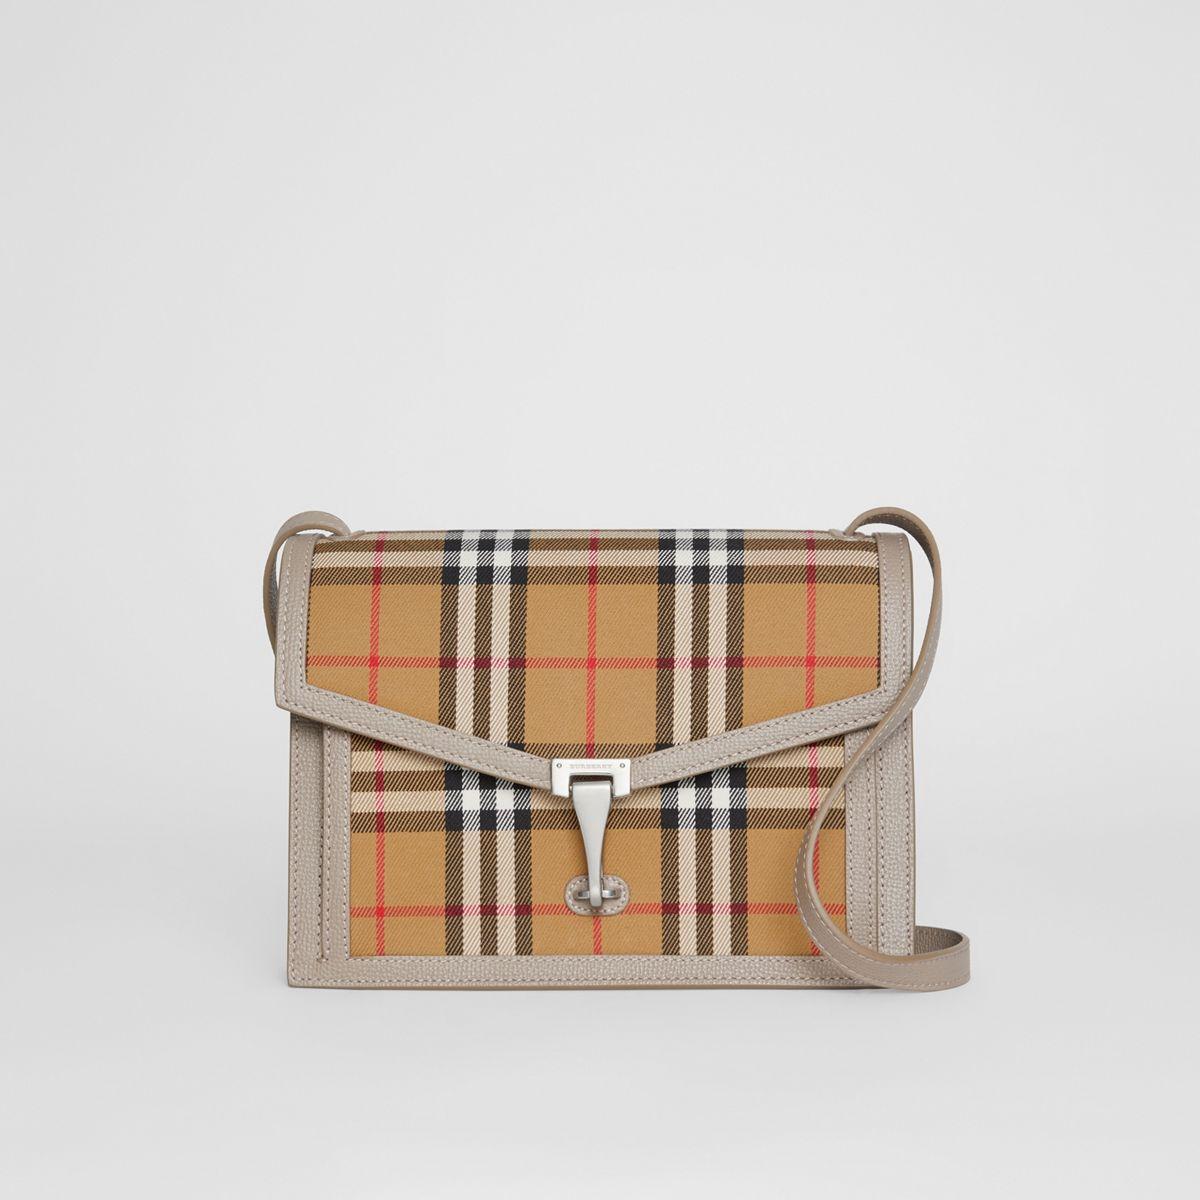 Burberry Small Vintage Check And Leather Crossbody Bag in Taupe Brown (Brown) - Lyst